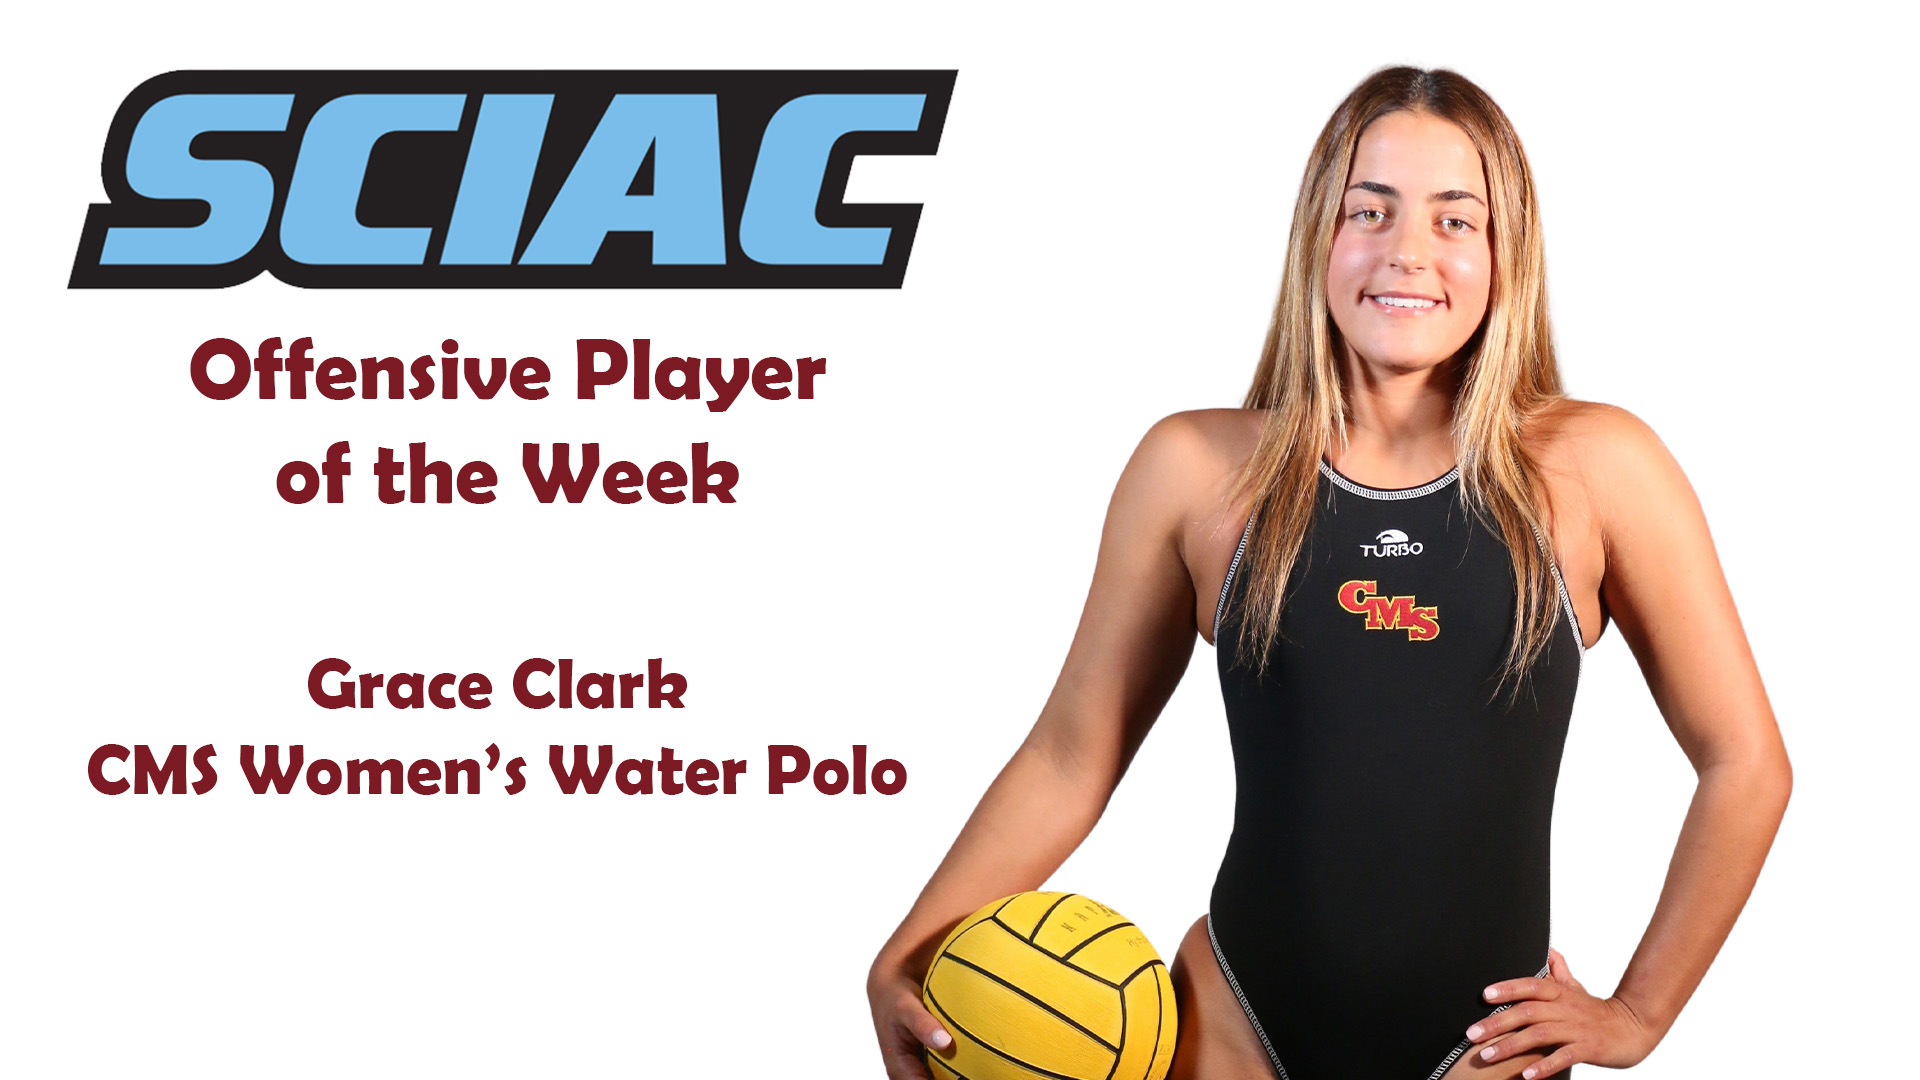 Posed shot of Grace Clark with SCIAC logo